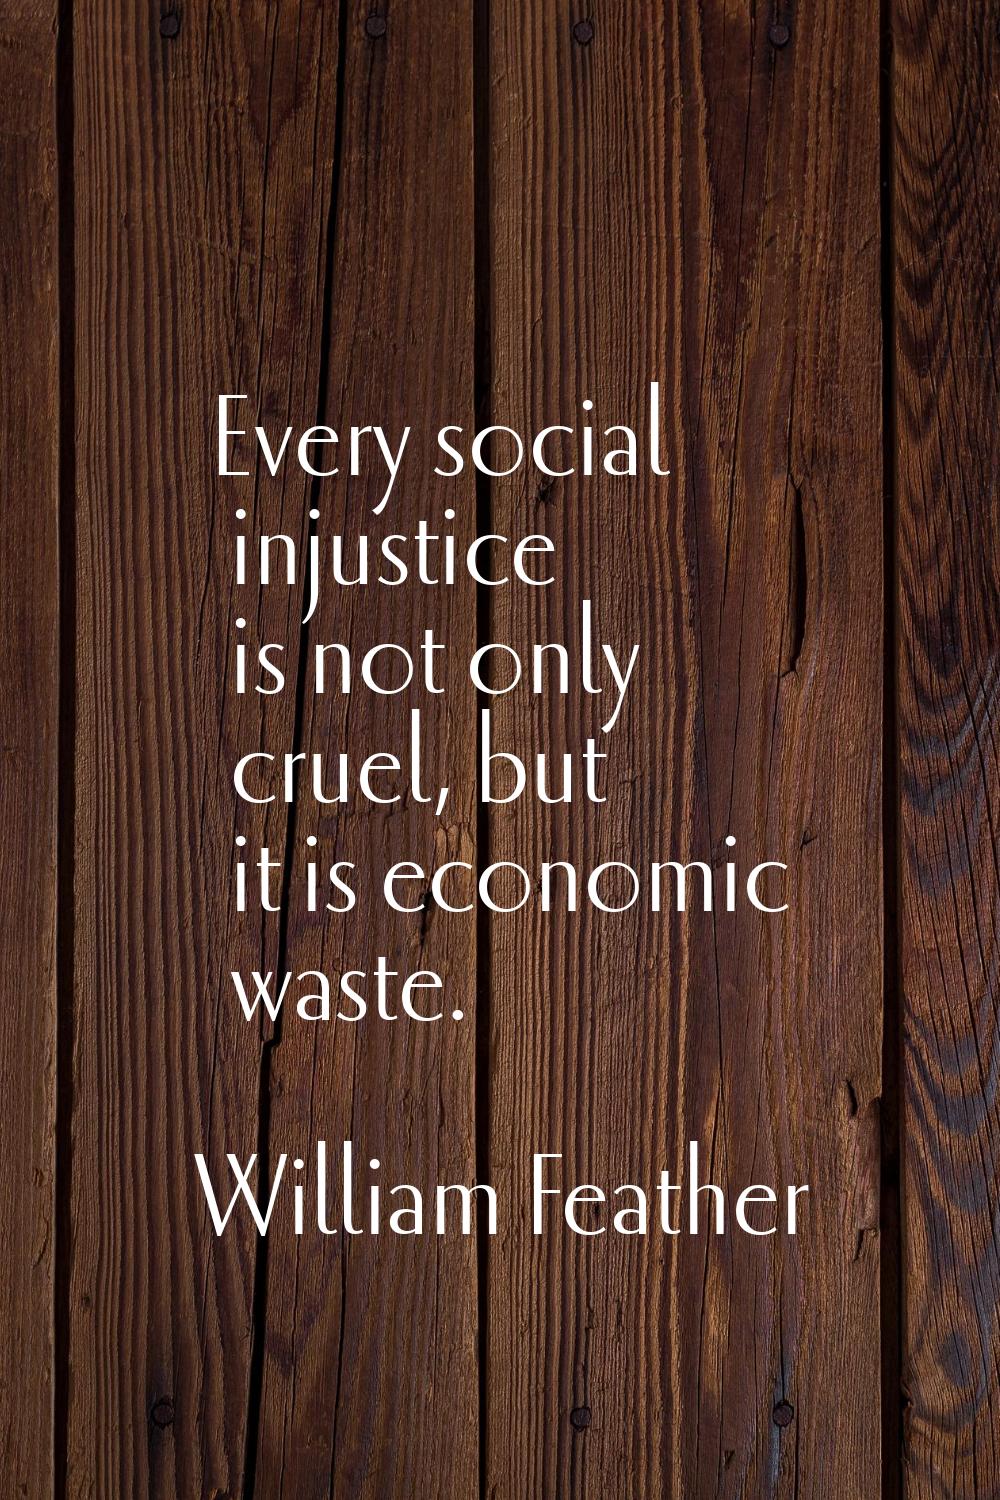 Every social injustice is not only cruel, but it is economic waste.